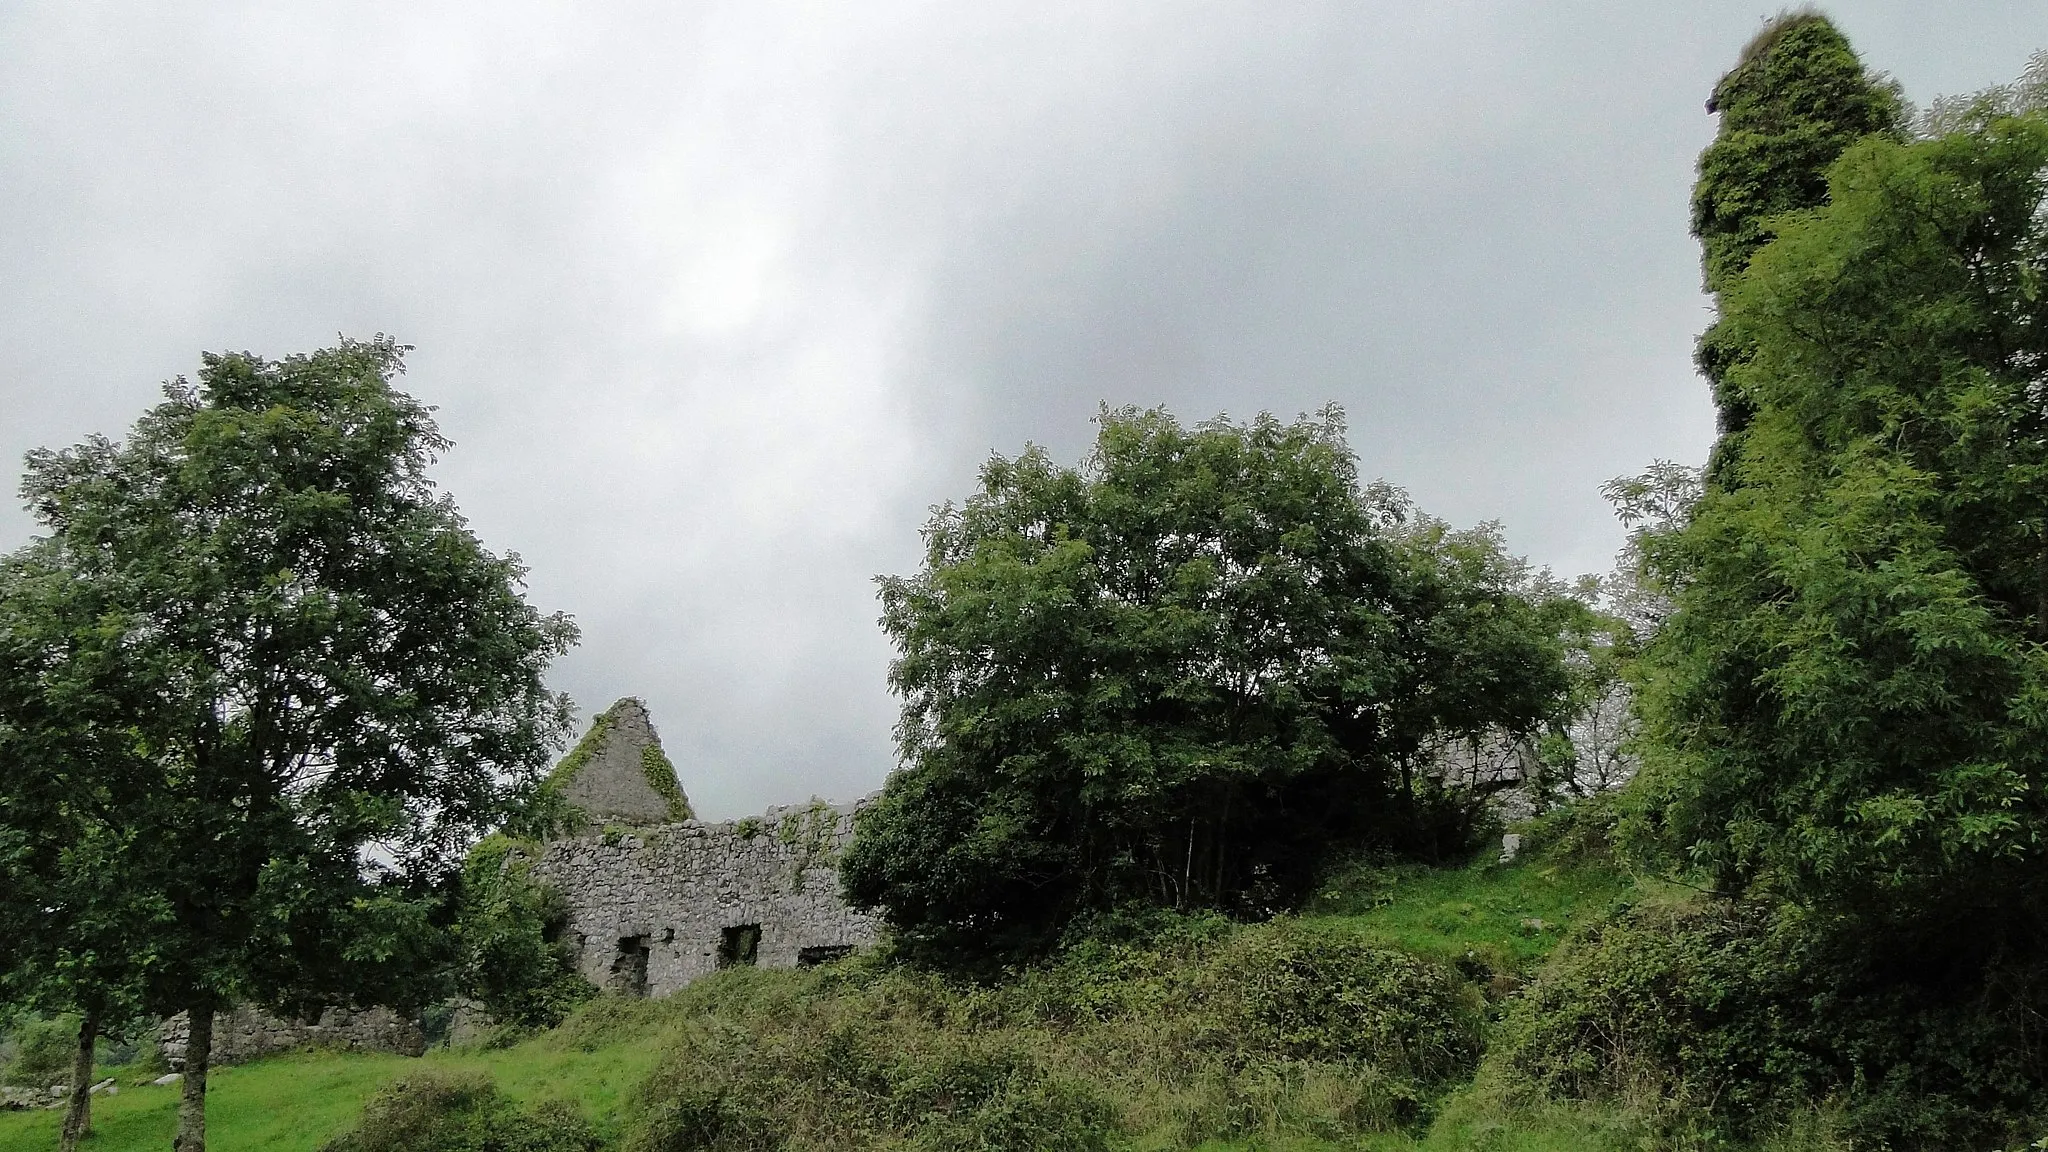 Photo showing: Ruins of Inchiquin Castle near Corofin, County Clare, Ireland. View of the outside, main building on the left, overgrown Tower to the right.